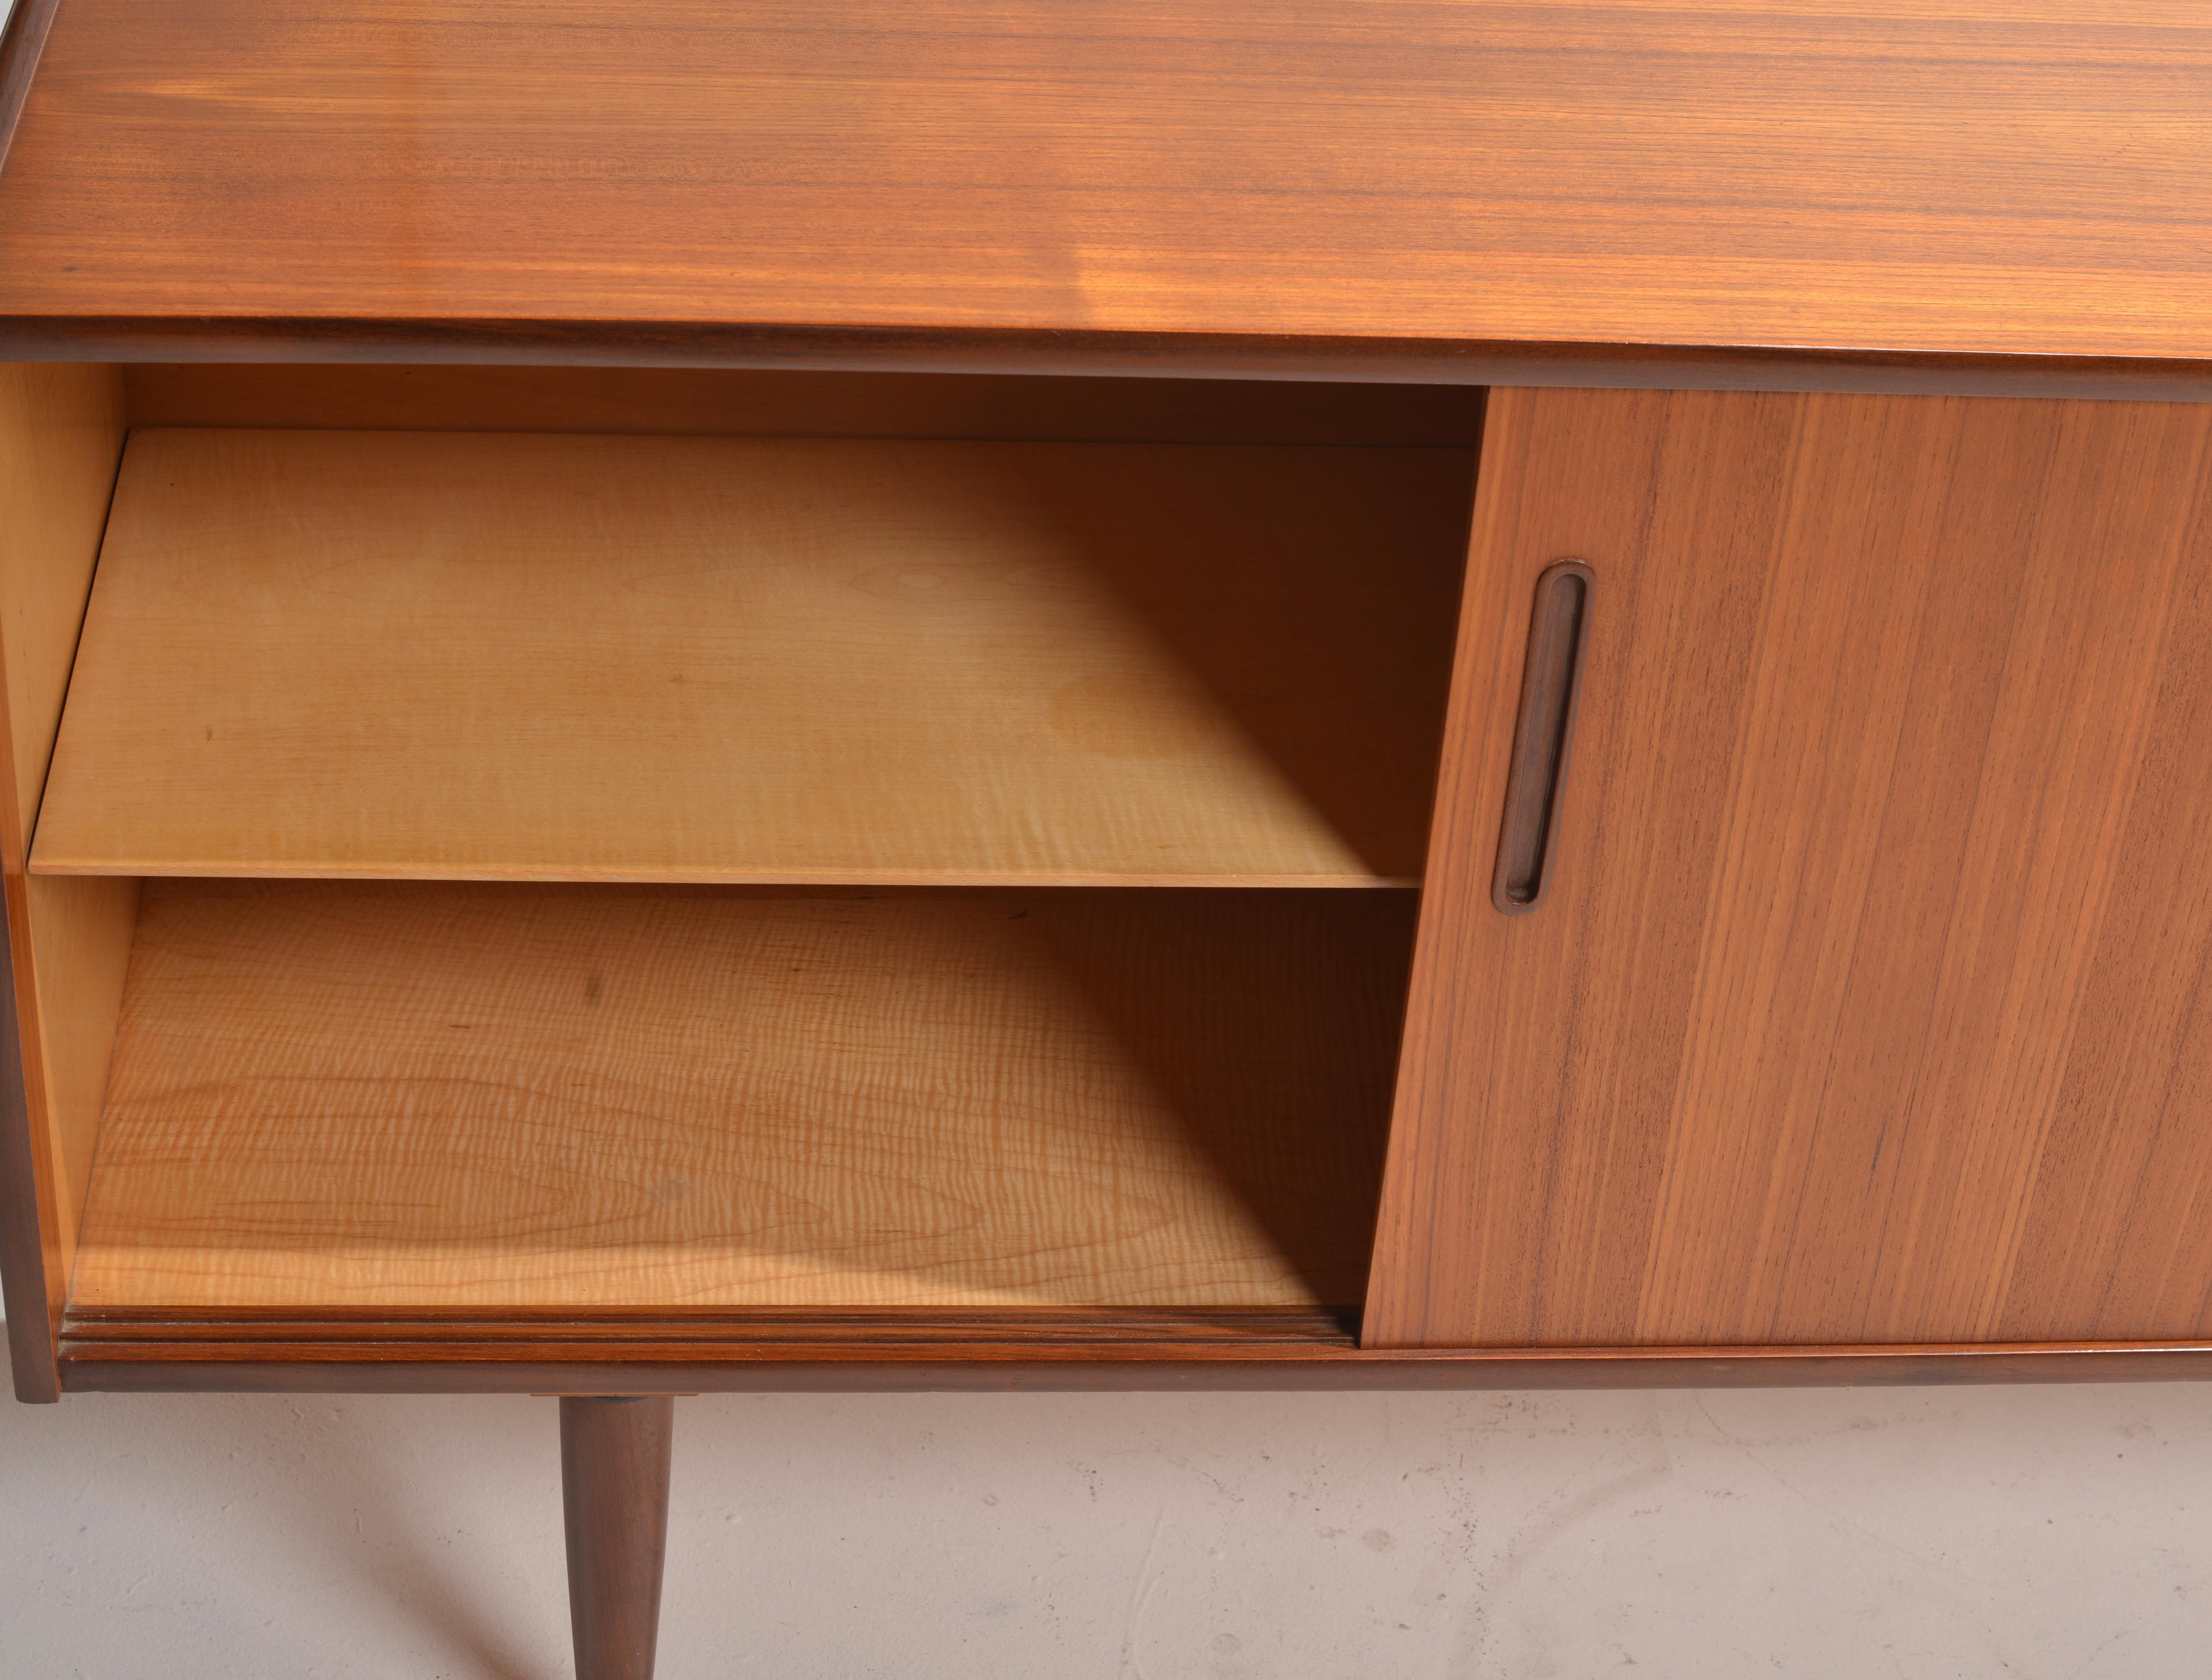 Mid-20th Century Trento Credenza in Teak by Nils Jonsson,  Sweden c1965 For Sale